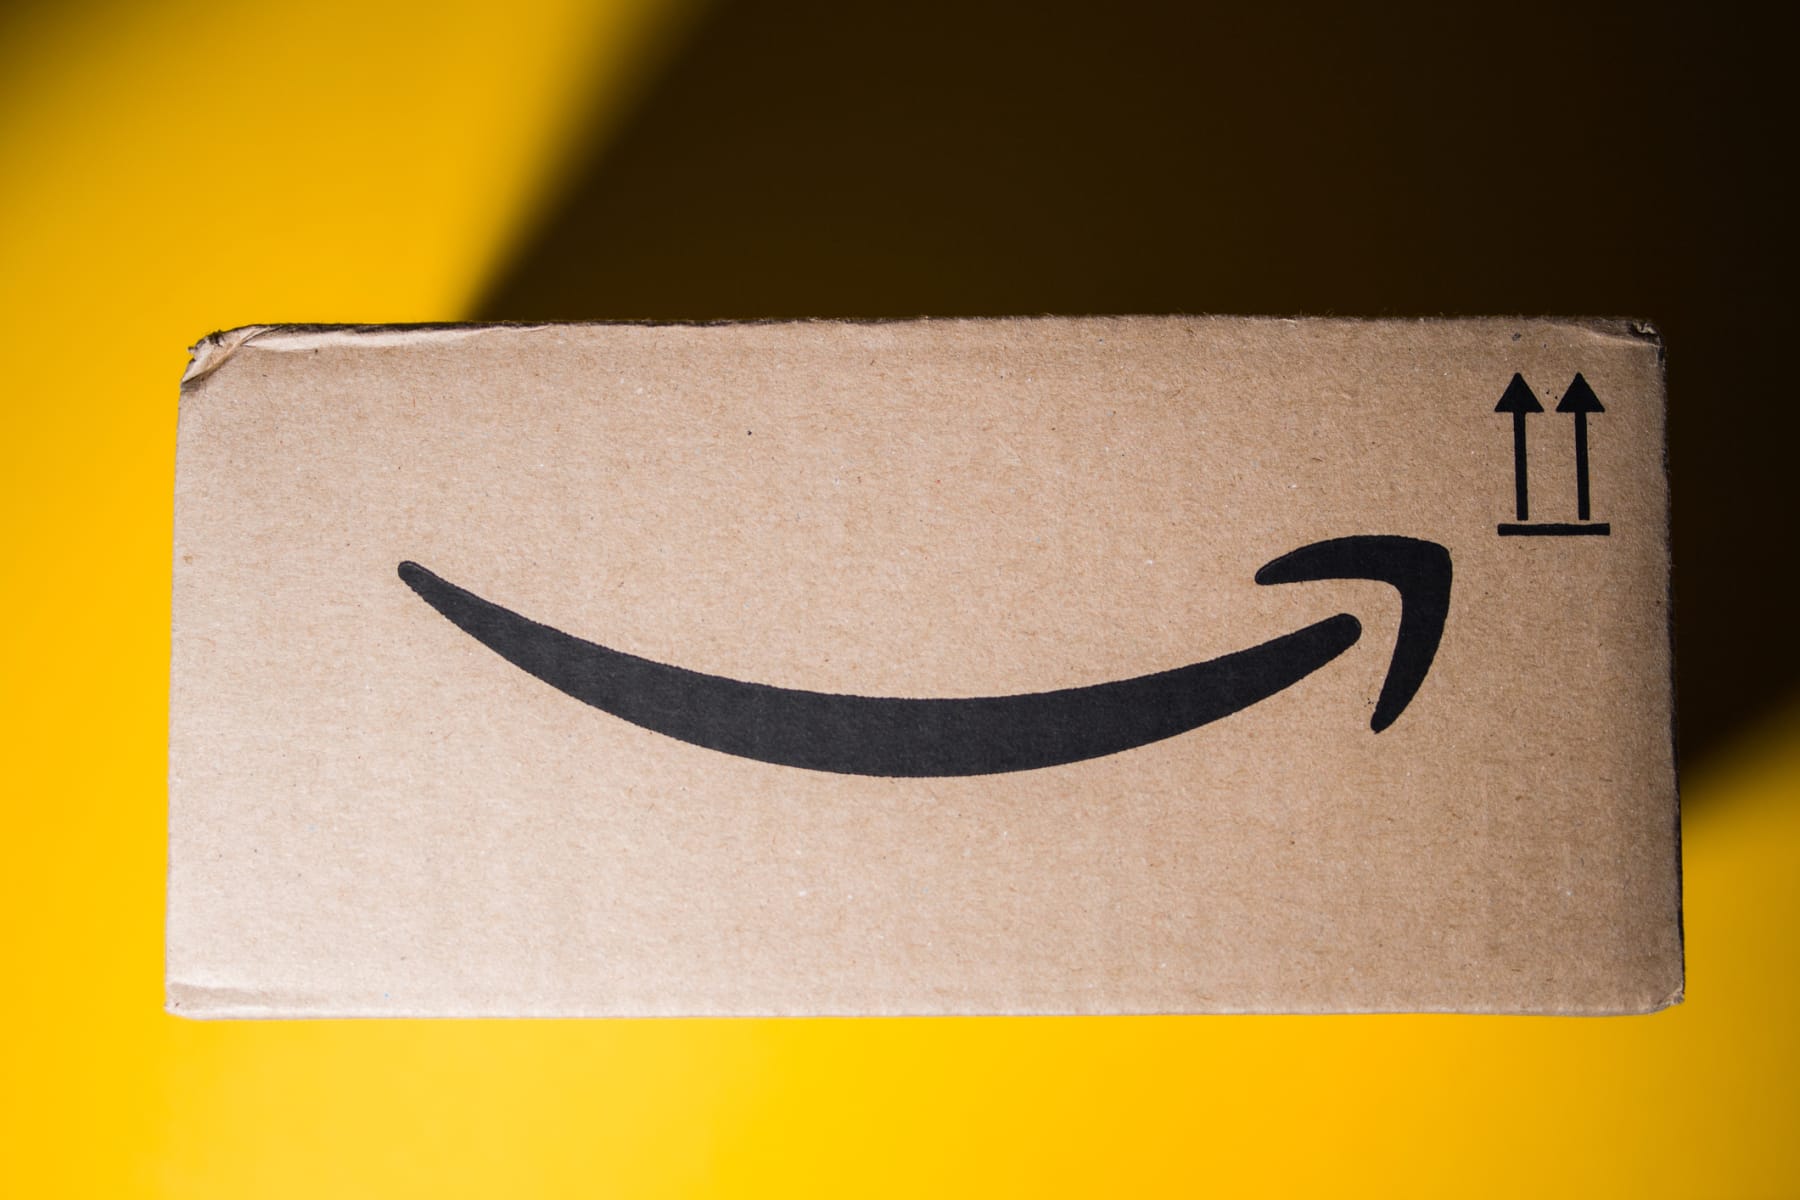 A cardboard Amazon box is shown against a yellow background.